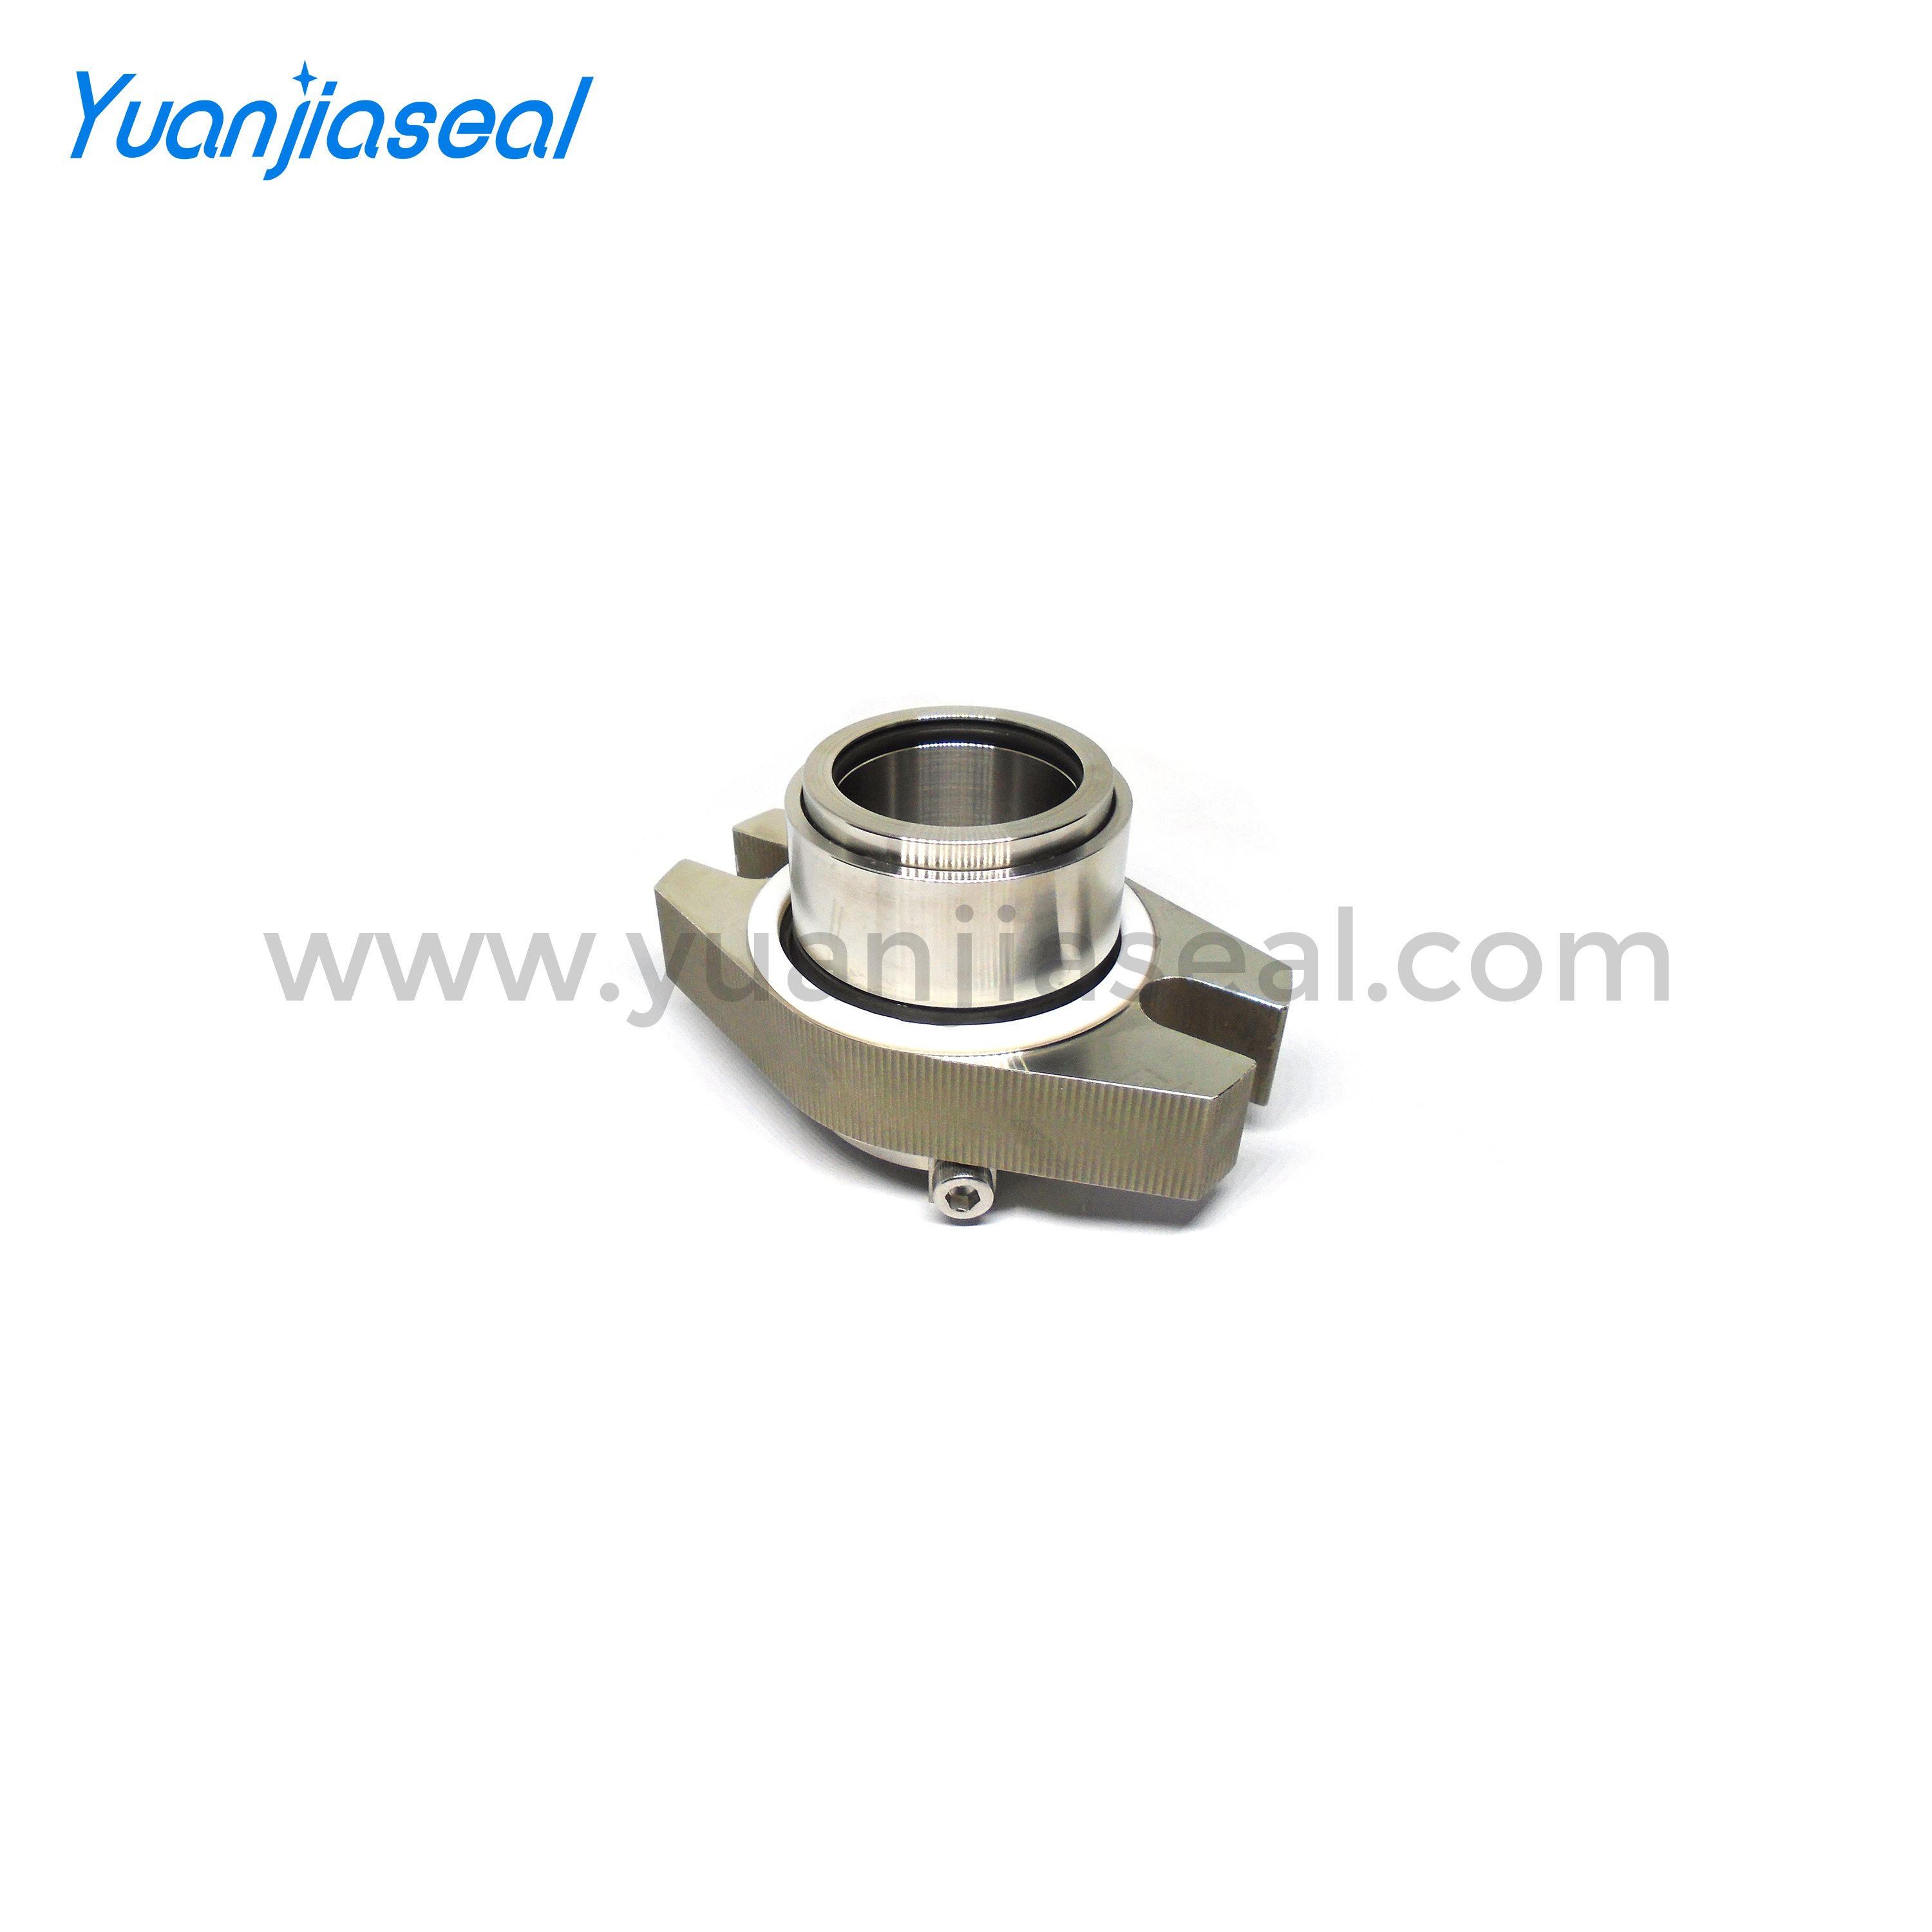 Where are cartridge seals used?